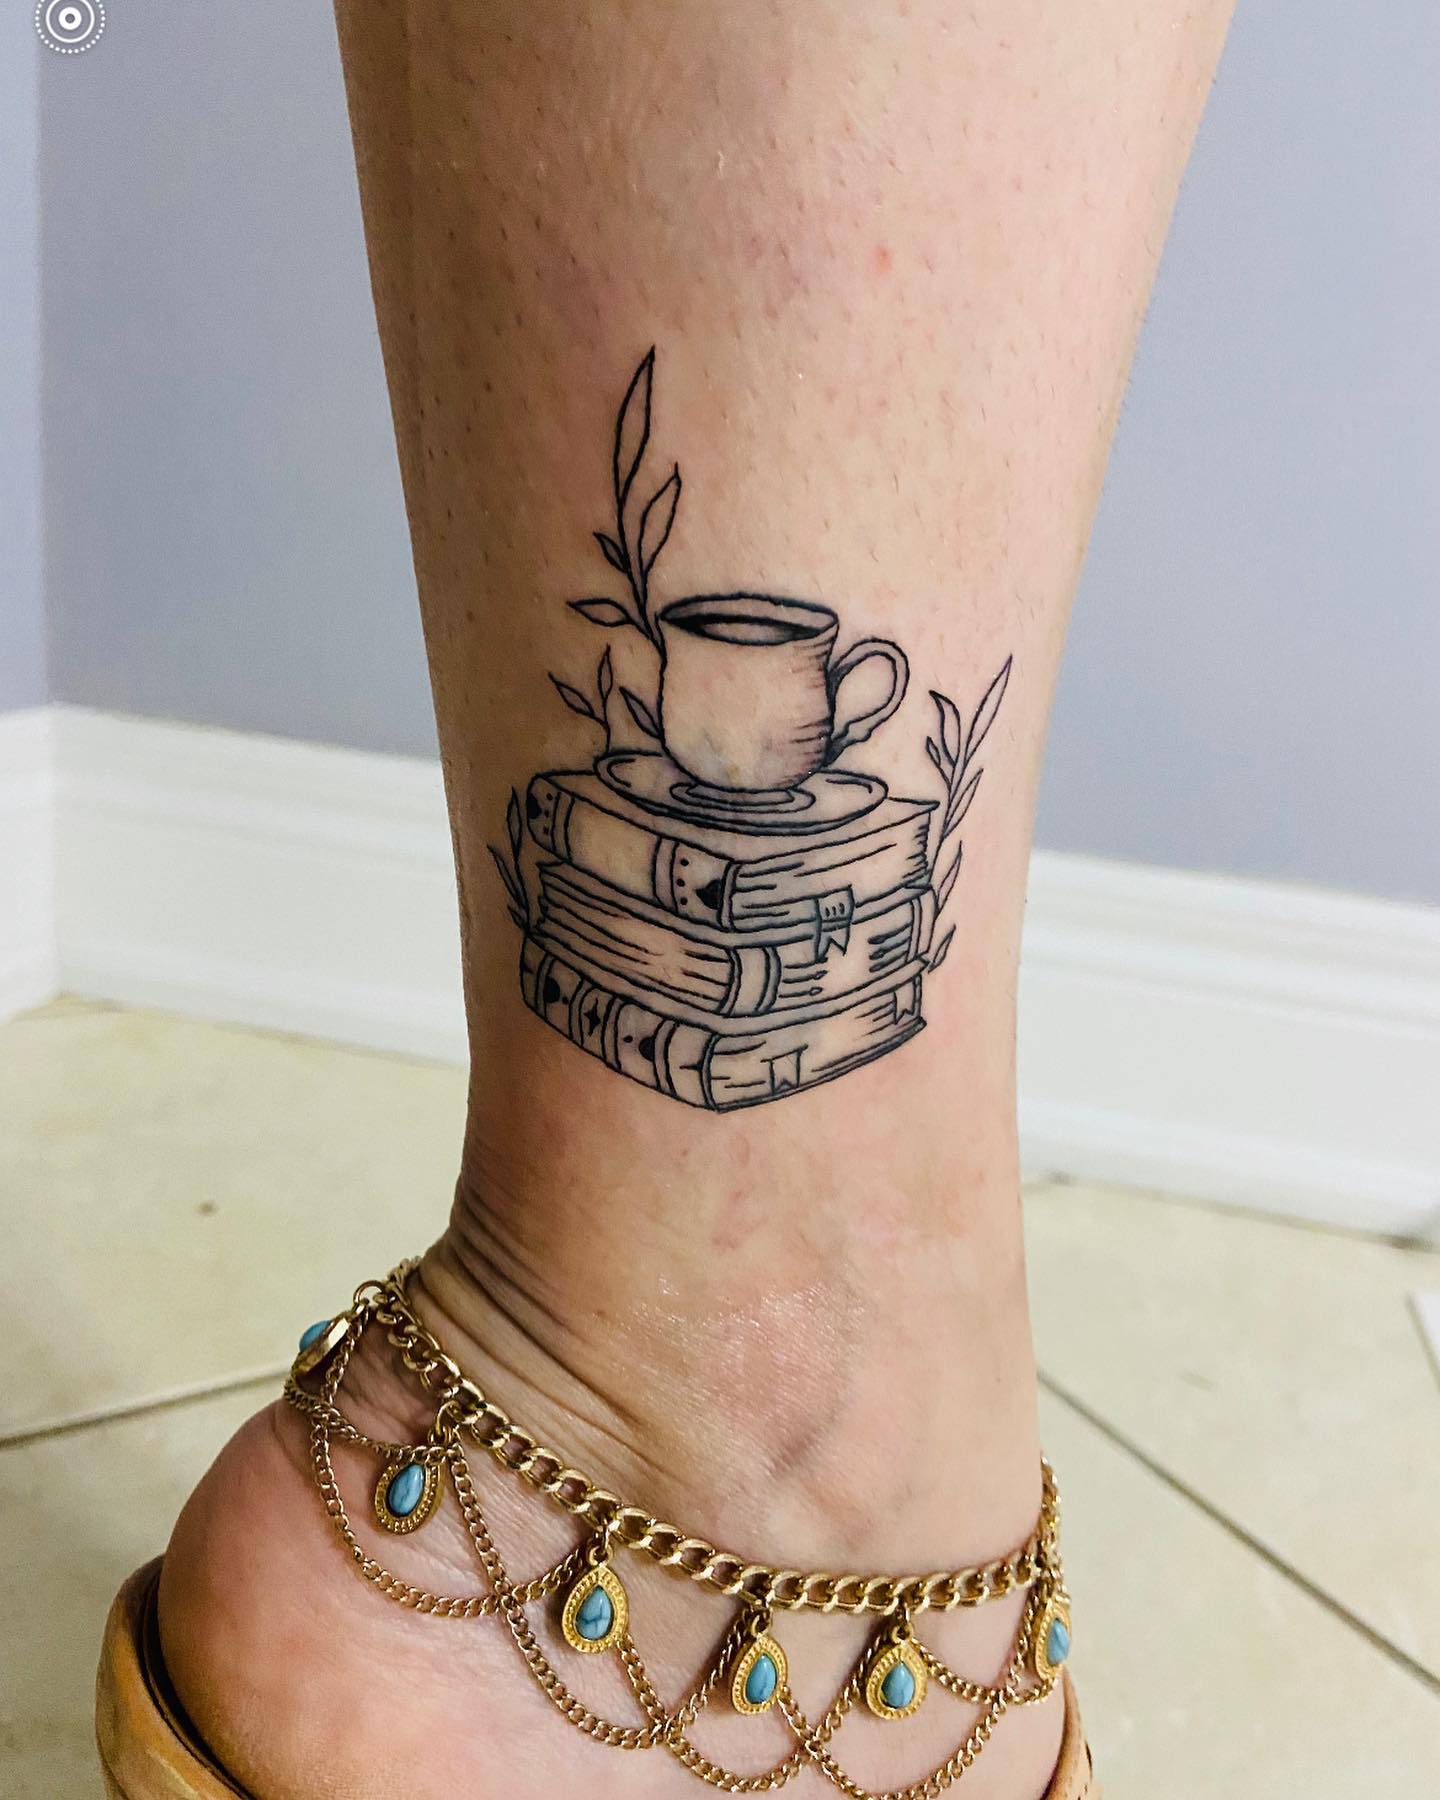 Some women love to read and are true bookworms. Does this sound like you? If you tend to read often and you fancy buying new books over and over again, this ankle inspo is for you. Show that you’re a smart lady, and everyone will admire your style.